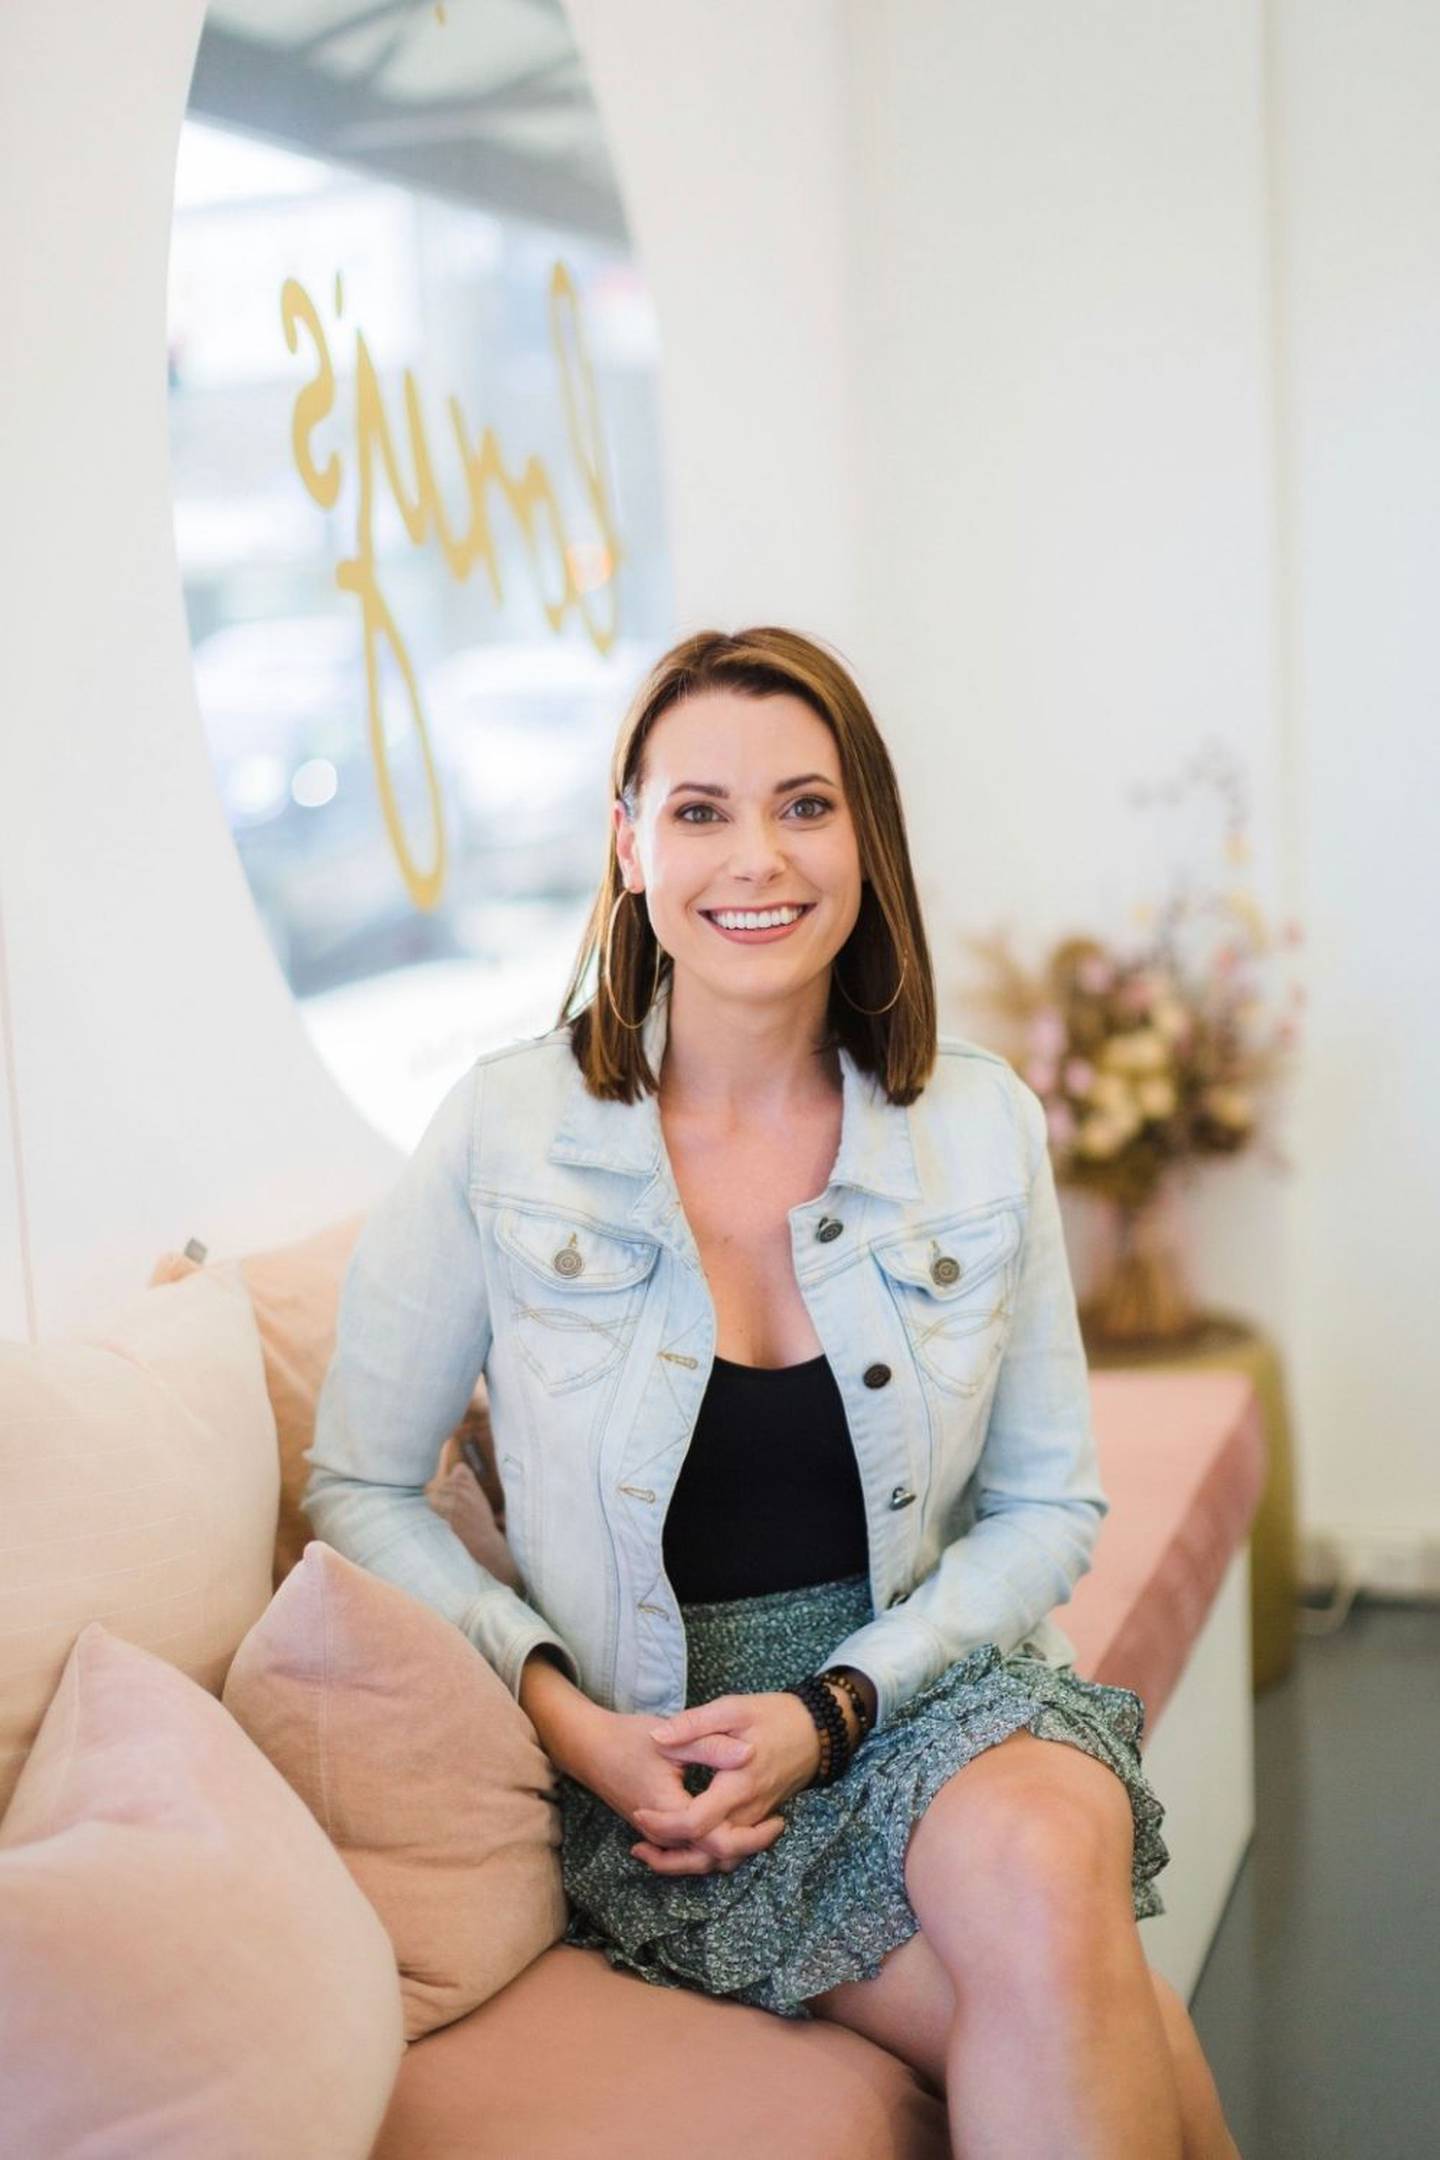 Loxy’s Kate Jarrett on juggling business and family, ditching the corporate world, and finding success